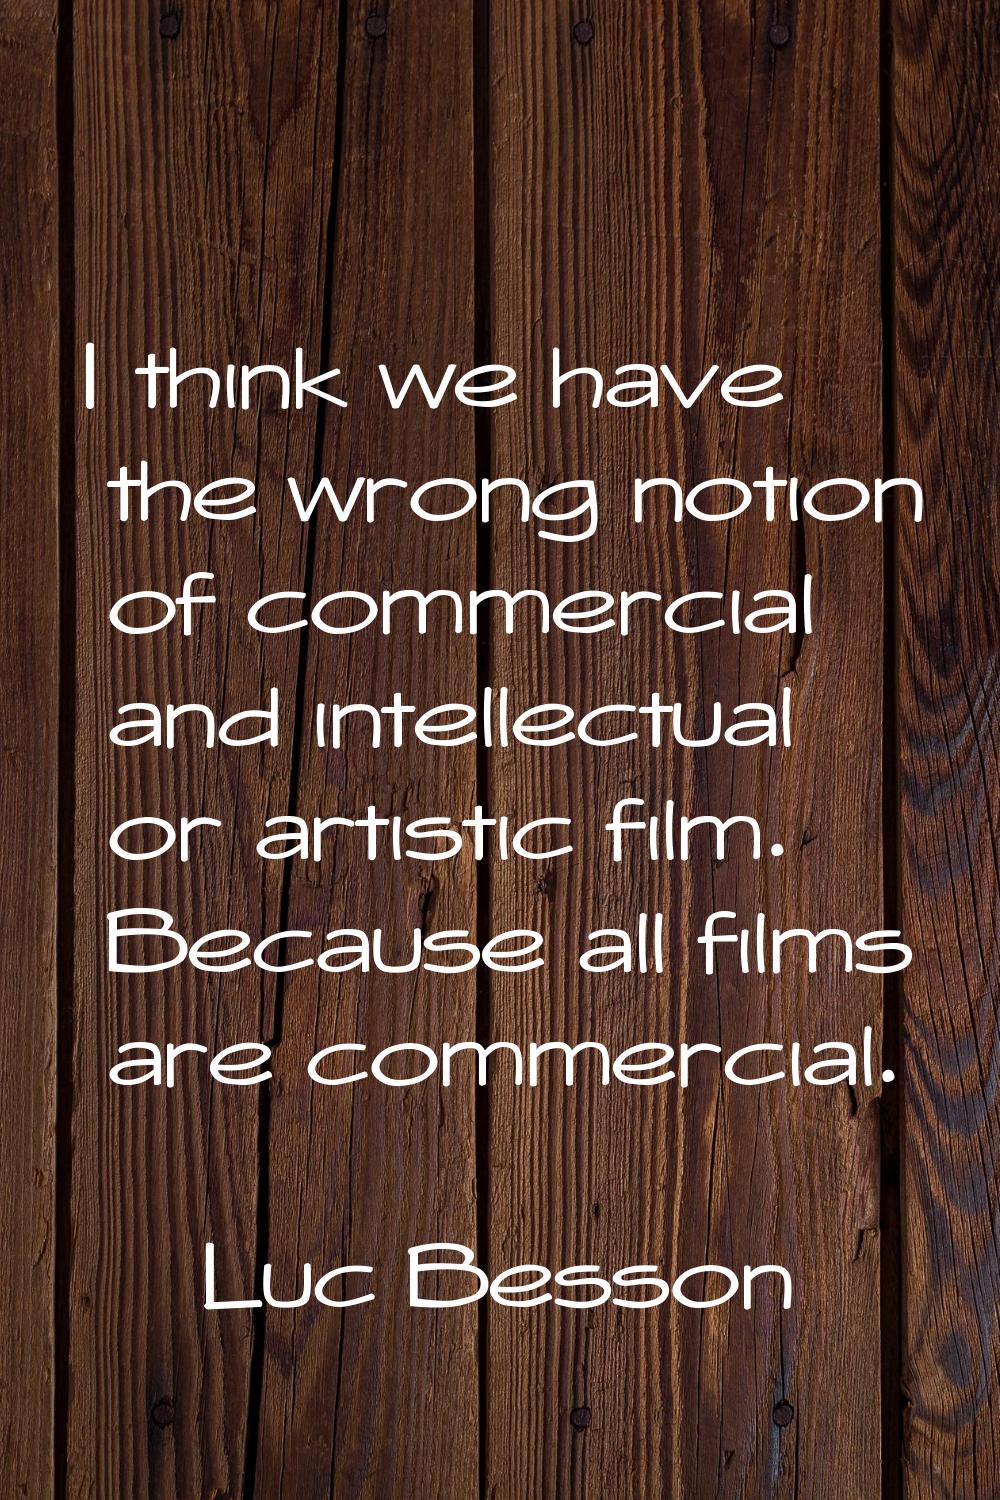 I think we have the wrong notion of commercial and intellectual or artistic film. Because all films